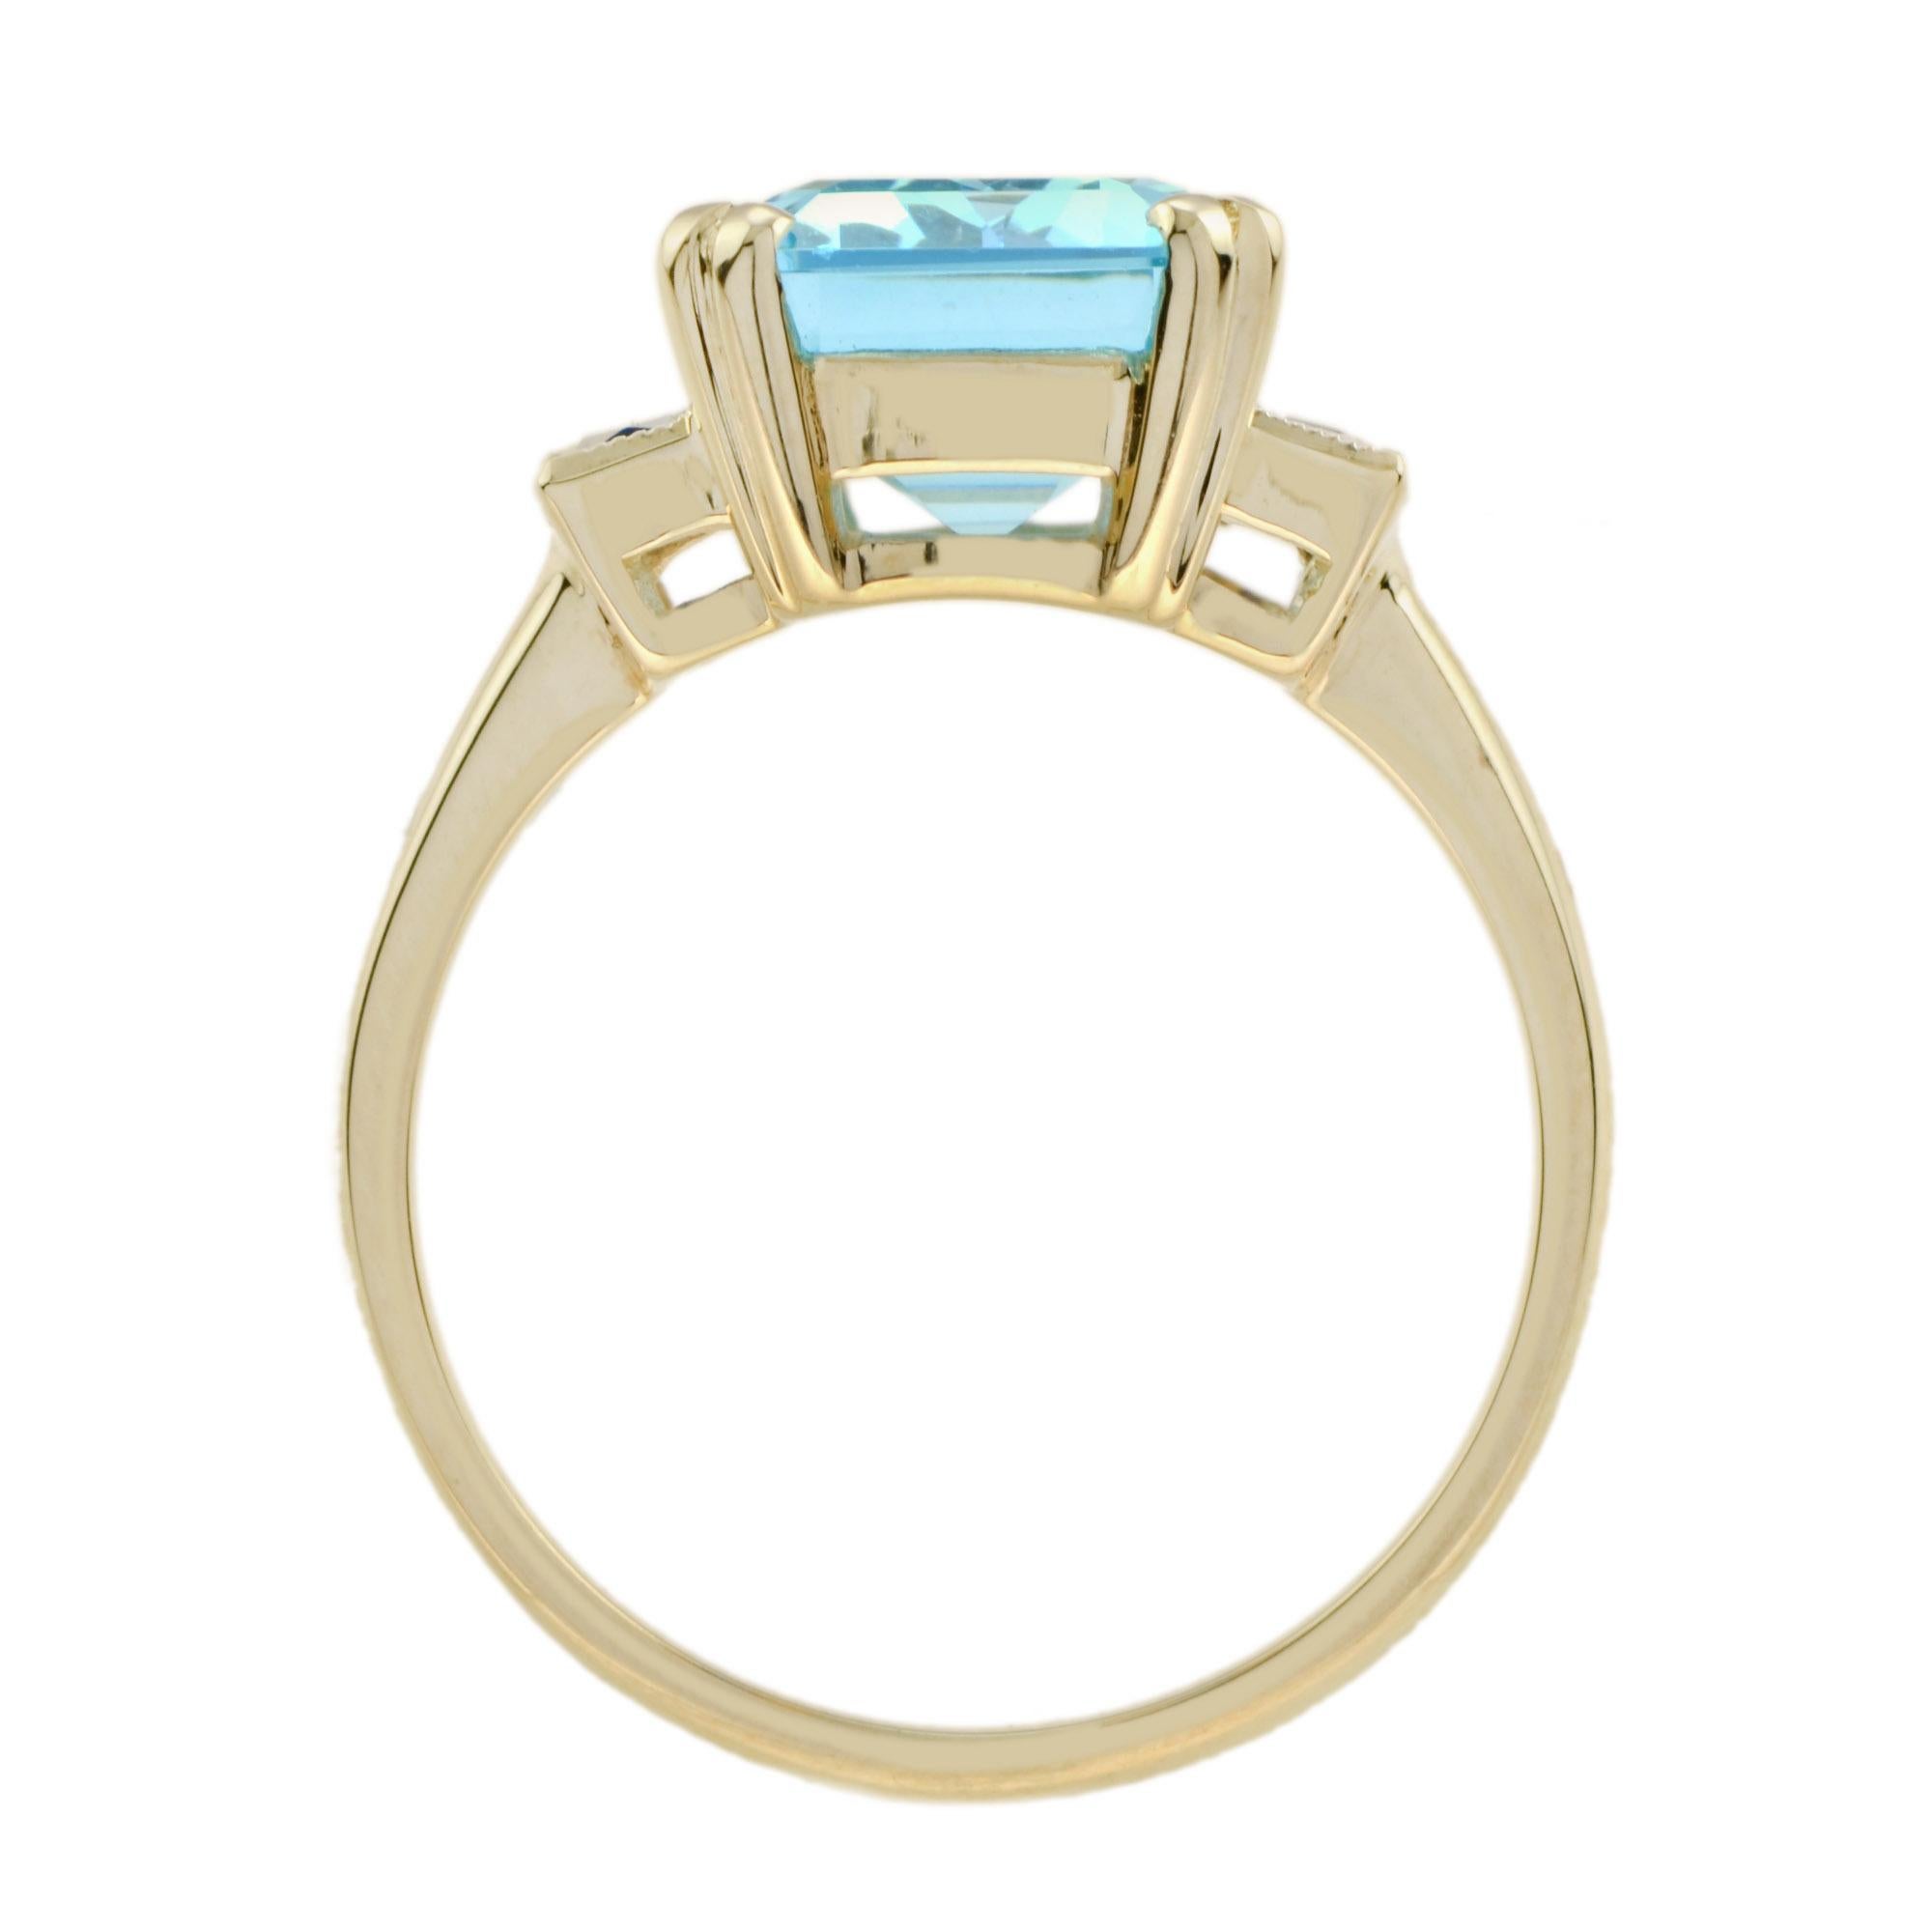 For Sale:  Emerald Cut Blue Topaz and Sapphire Art Deco Style Solitaire Ring in 14k Gold 7